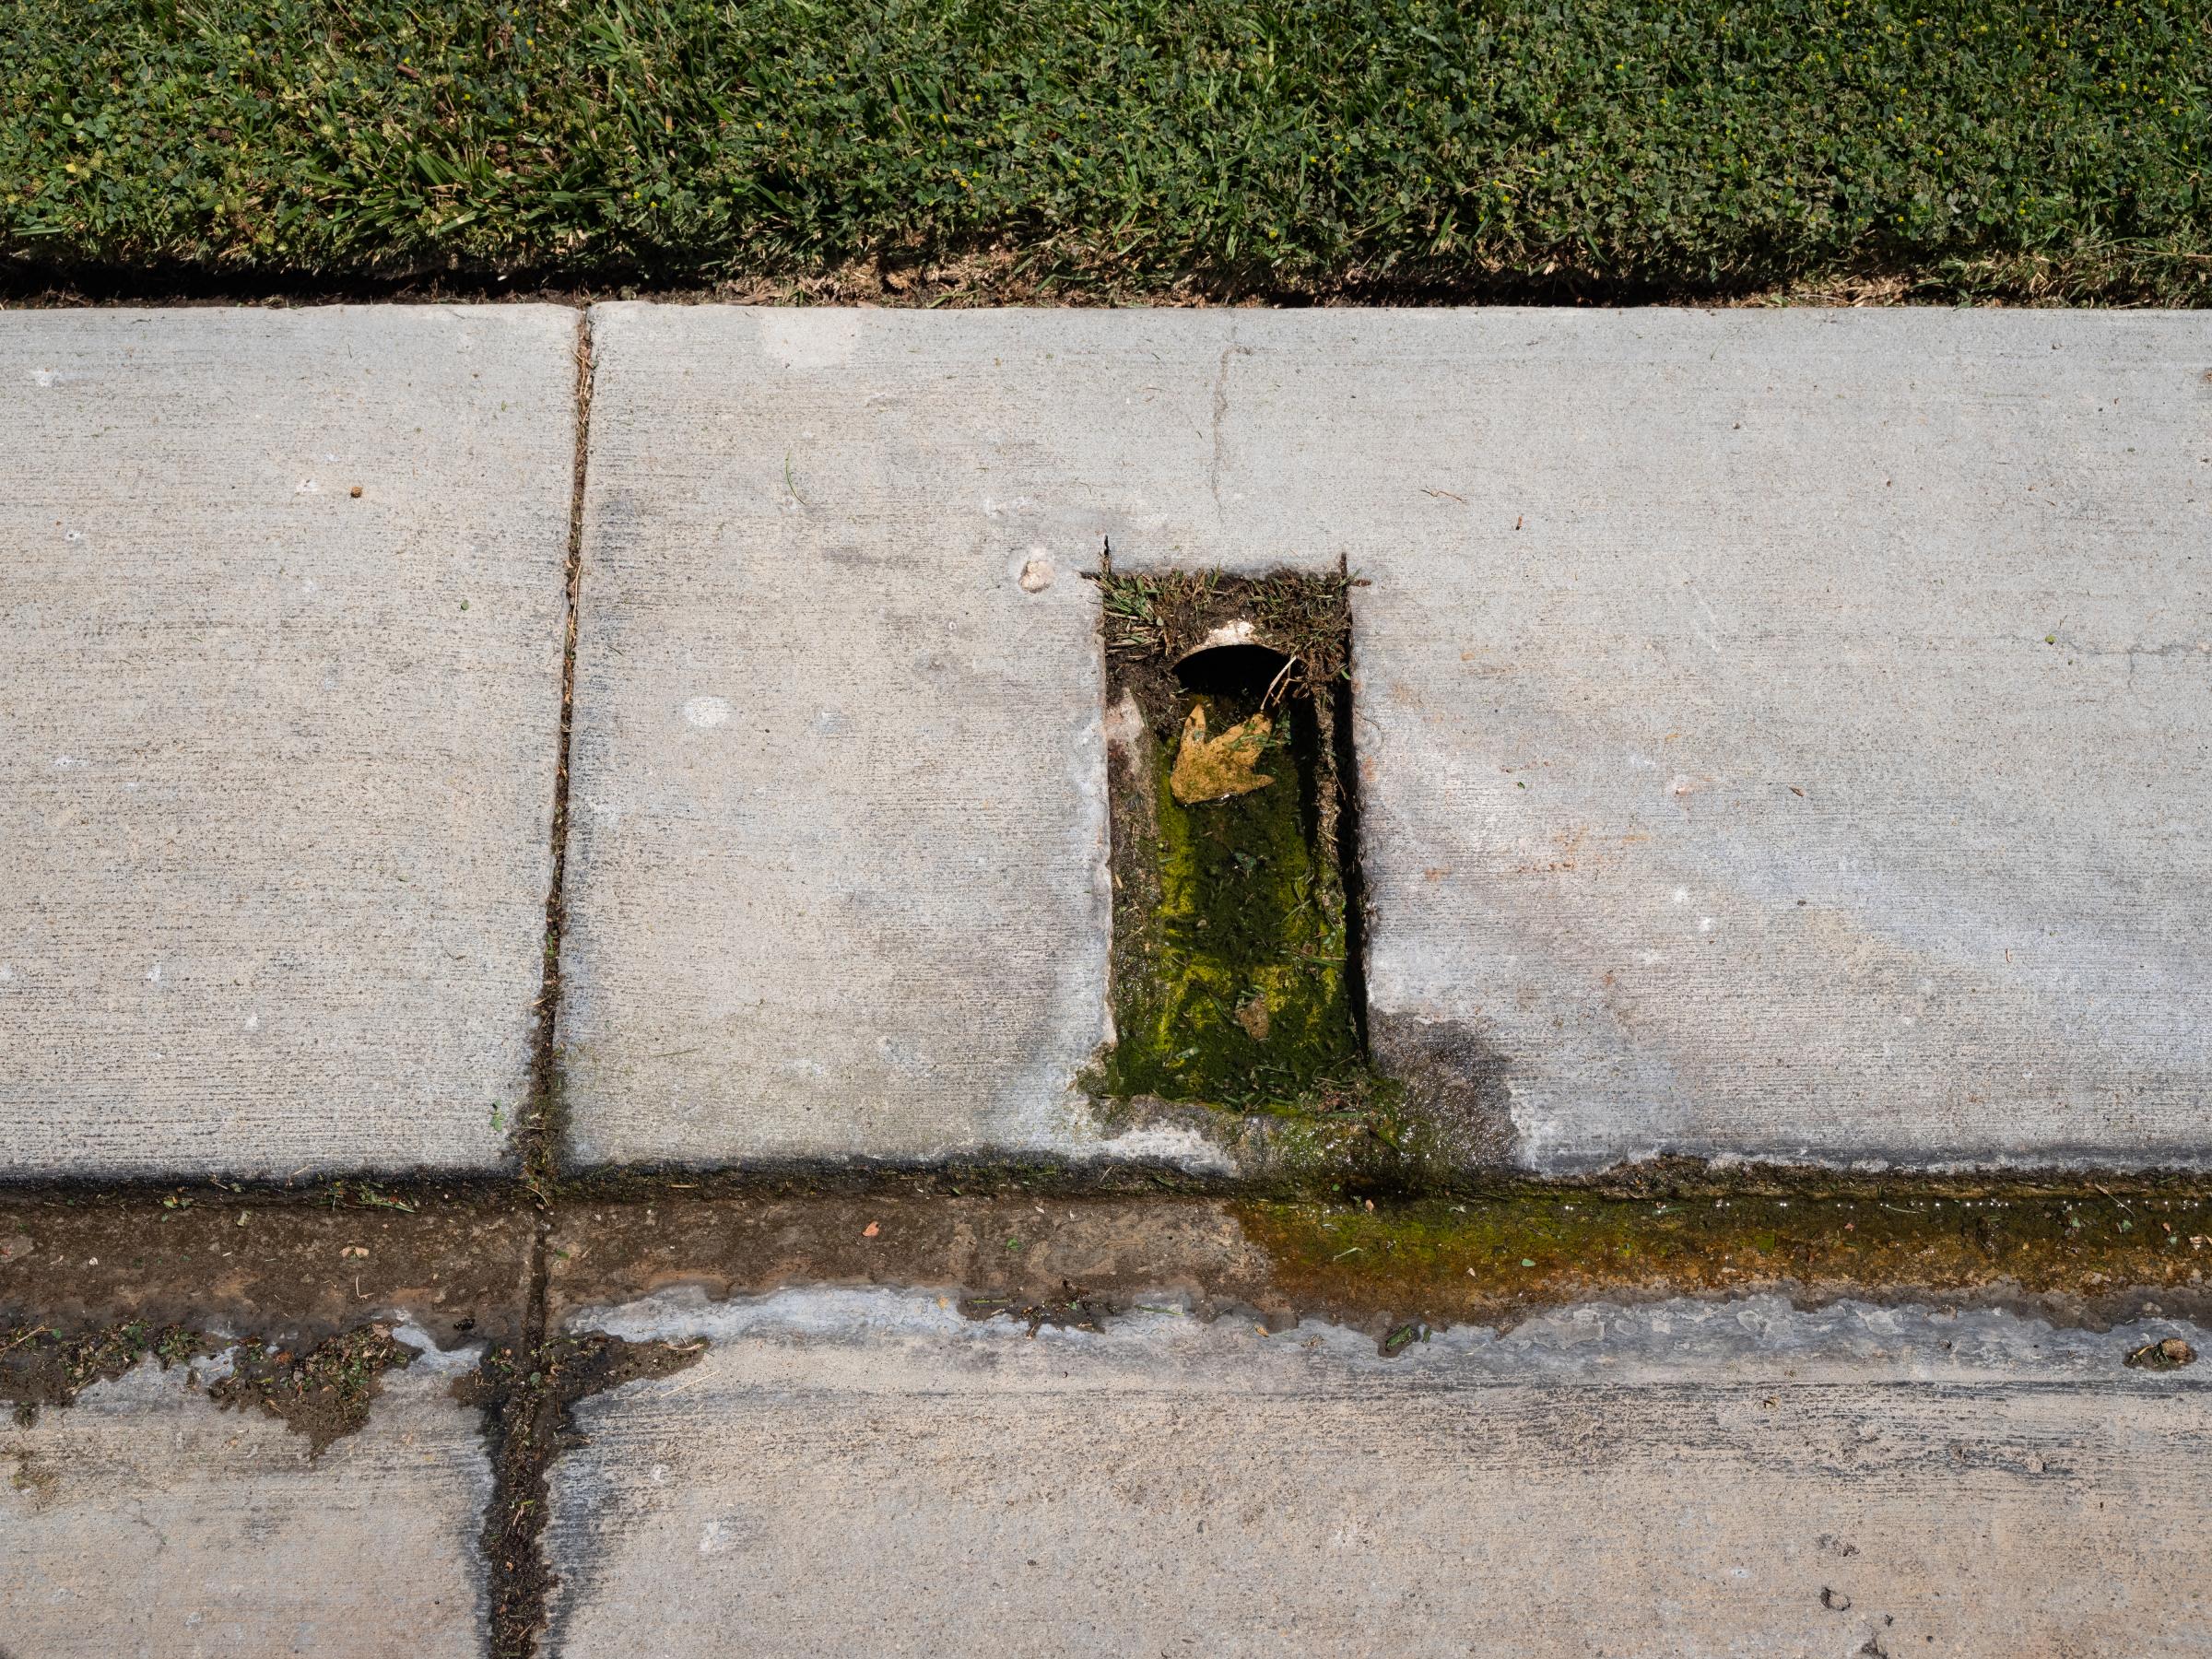 Water Cops - Wall Street Journal - Water runoff breeds algae in front of a home in The Oaks...